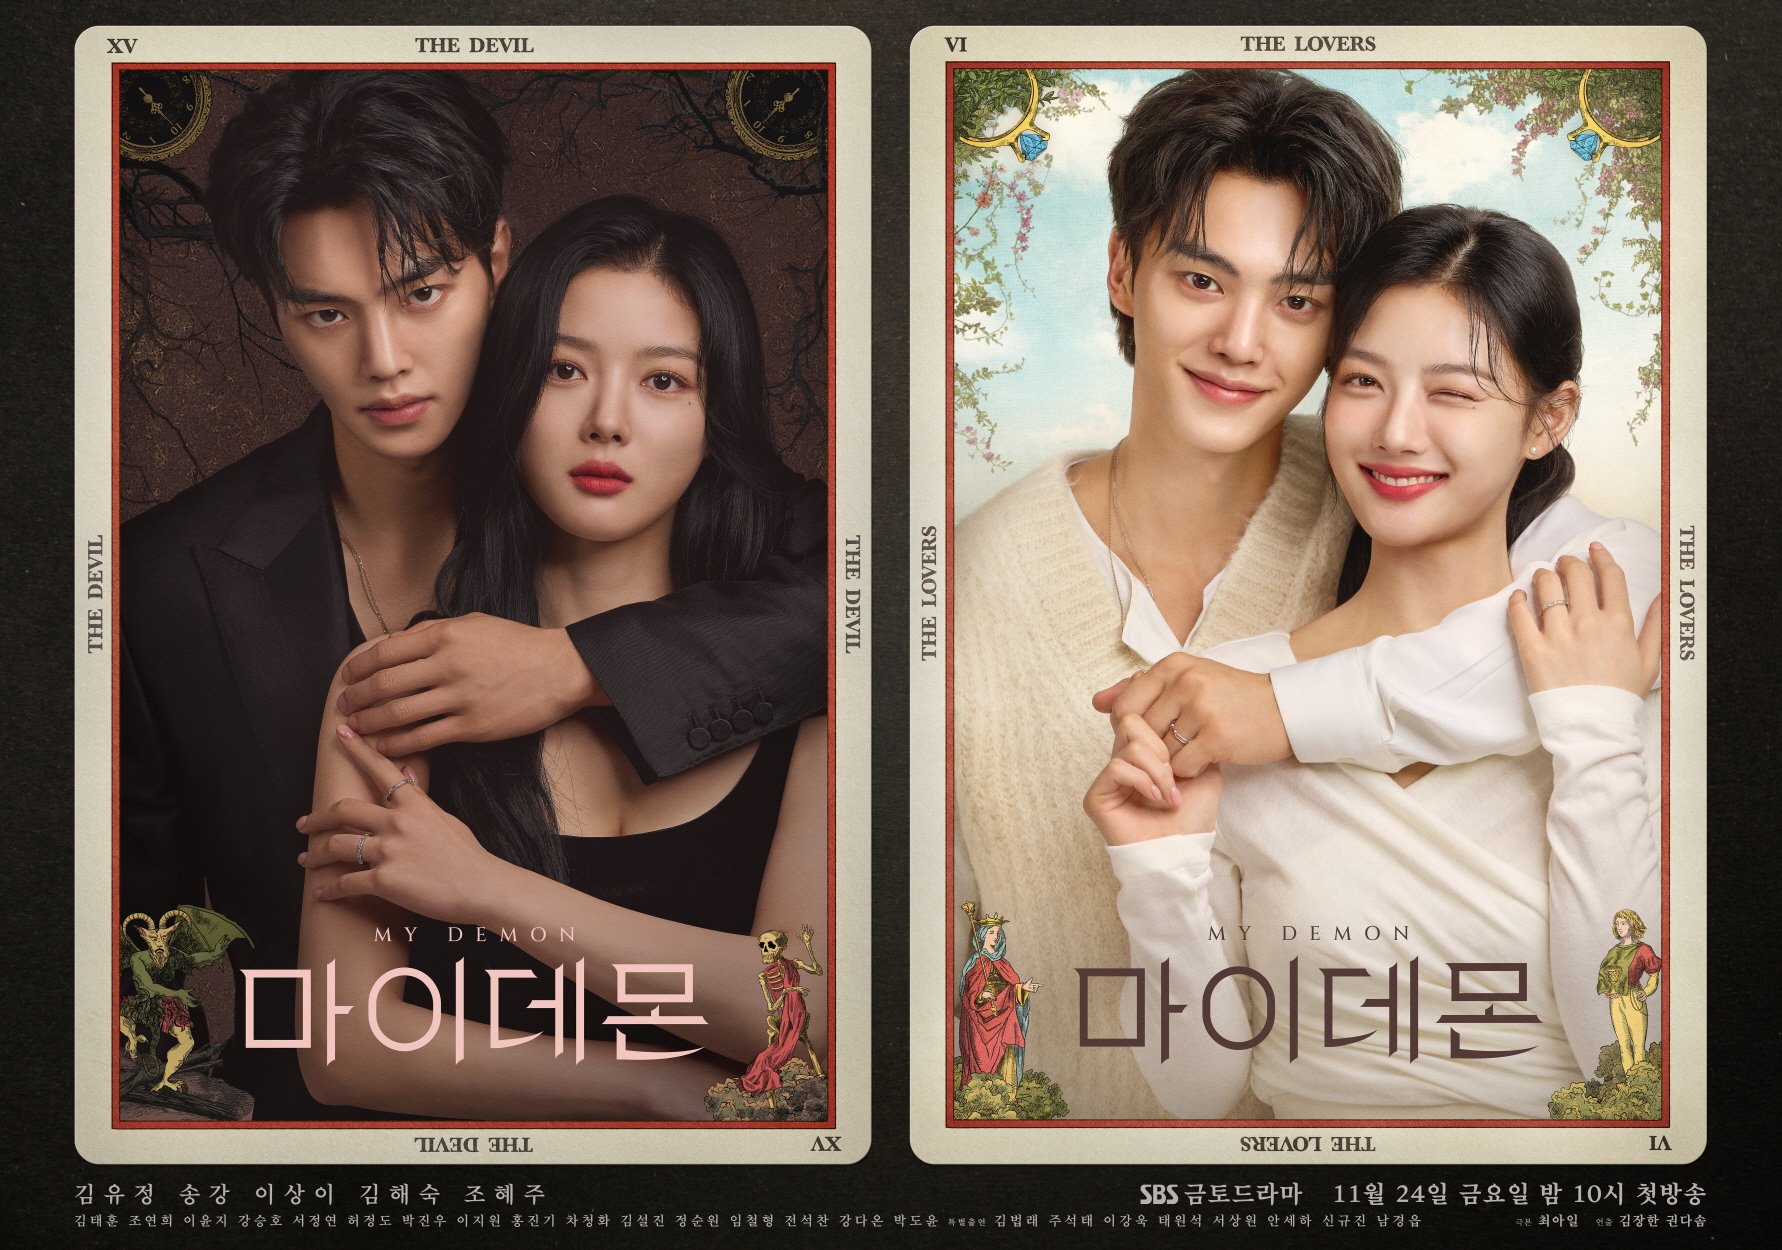 Kim Yoo-jung and Song Kang become lovers in My Demon